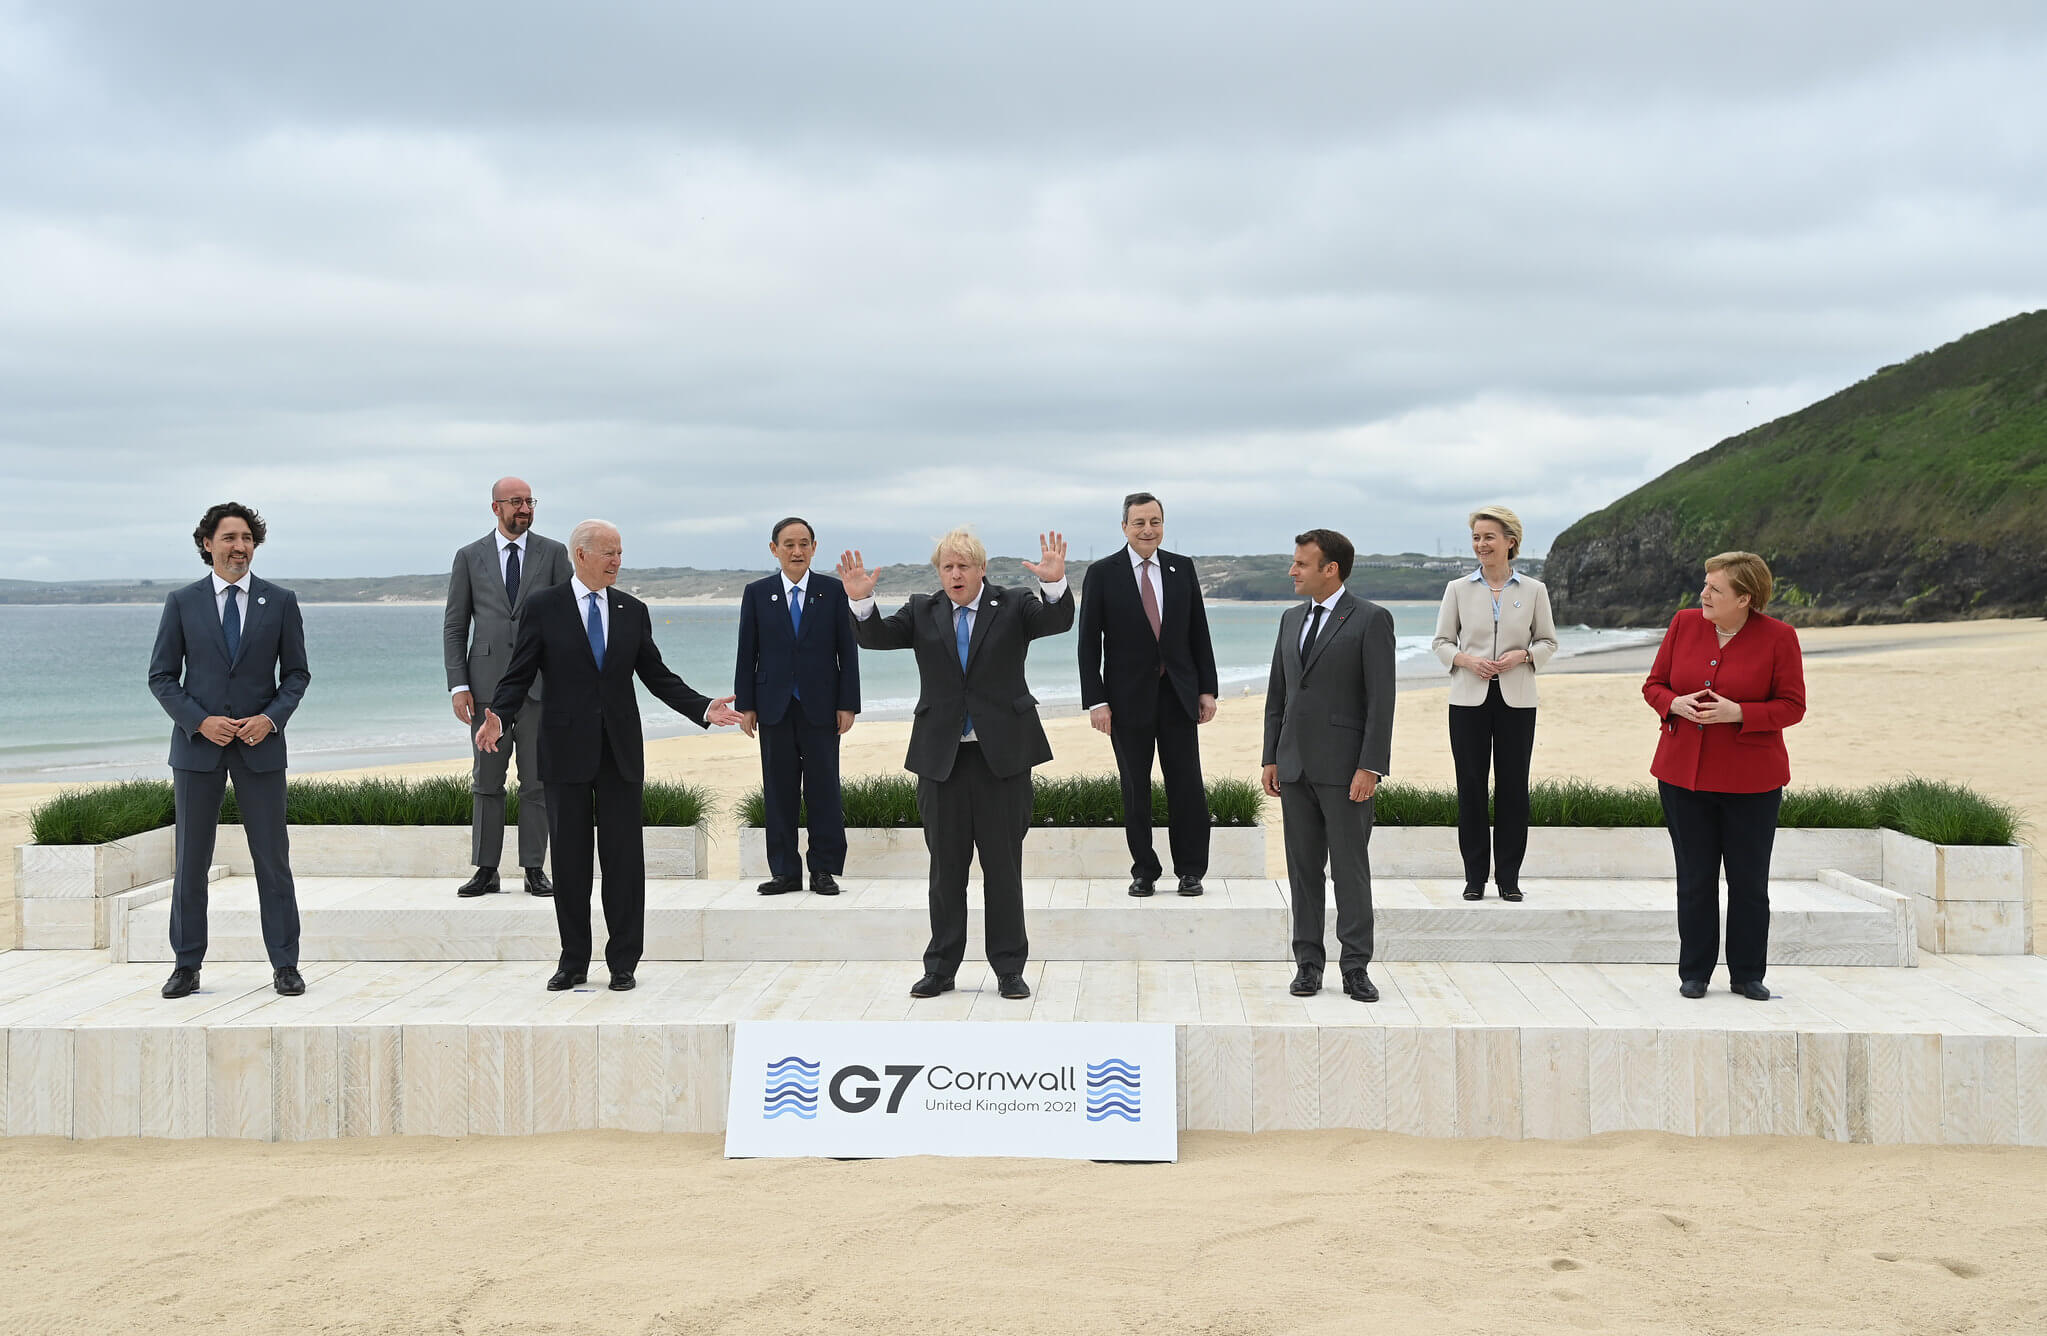 The hypocrisy of G7: Criticise Bitcoin Mining but Protect Fossil Fuel Industry